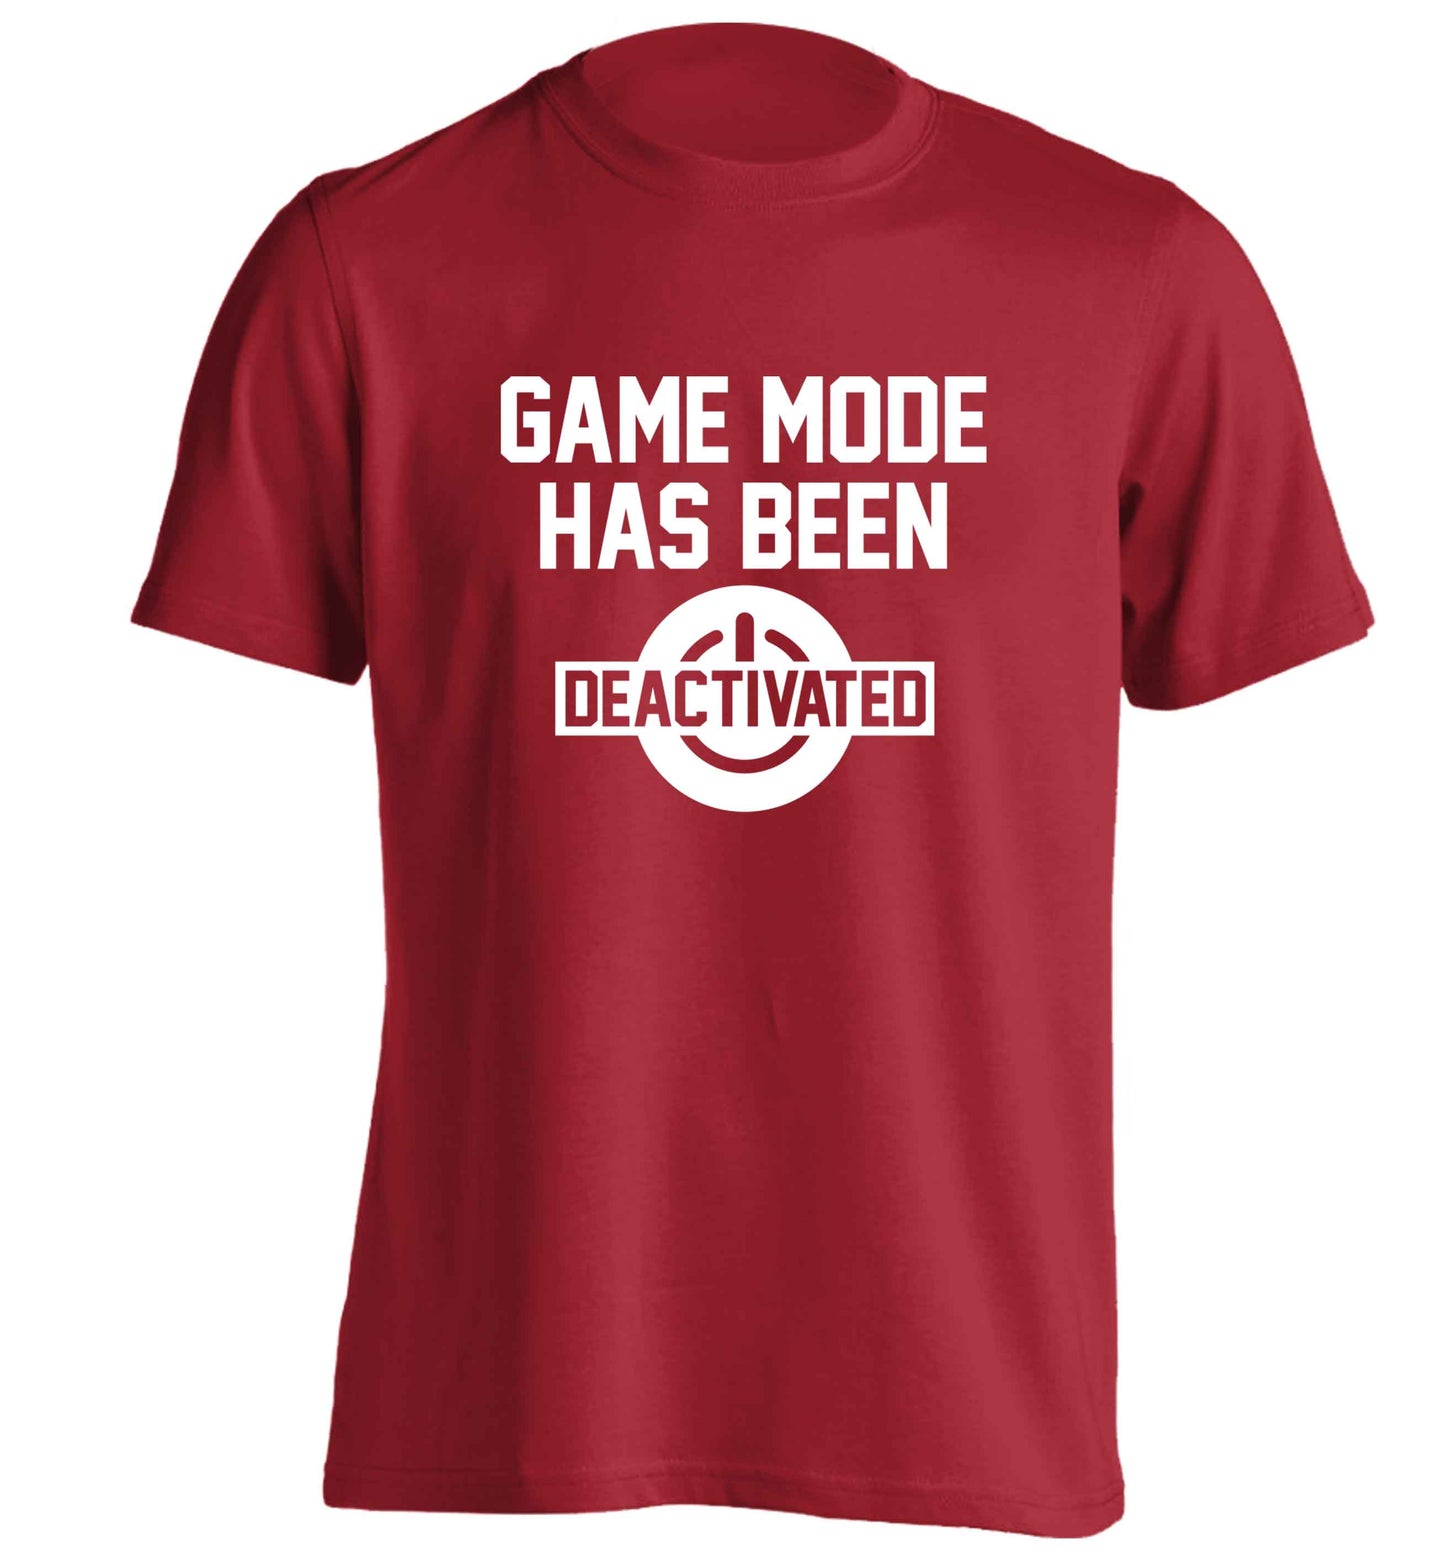 Game Mode Has Been Deactivated adults unisex red Tshirt 2XL